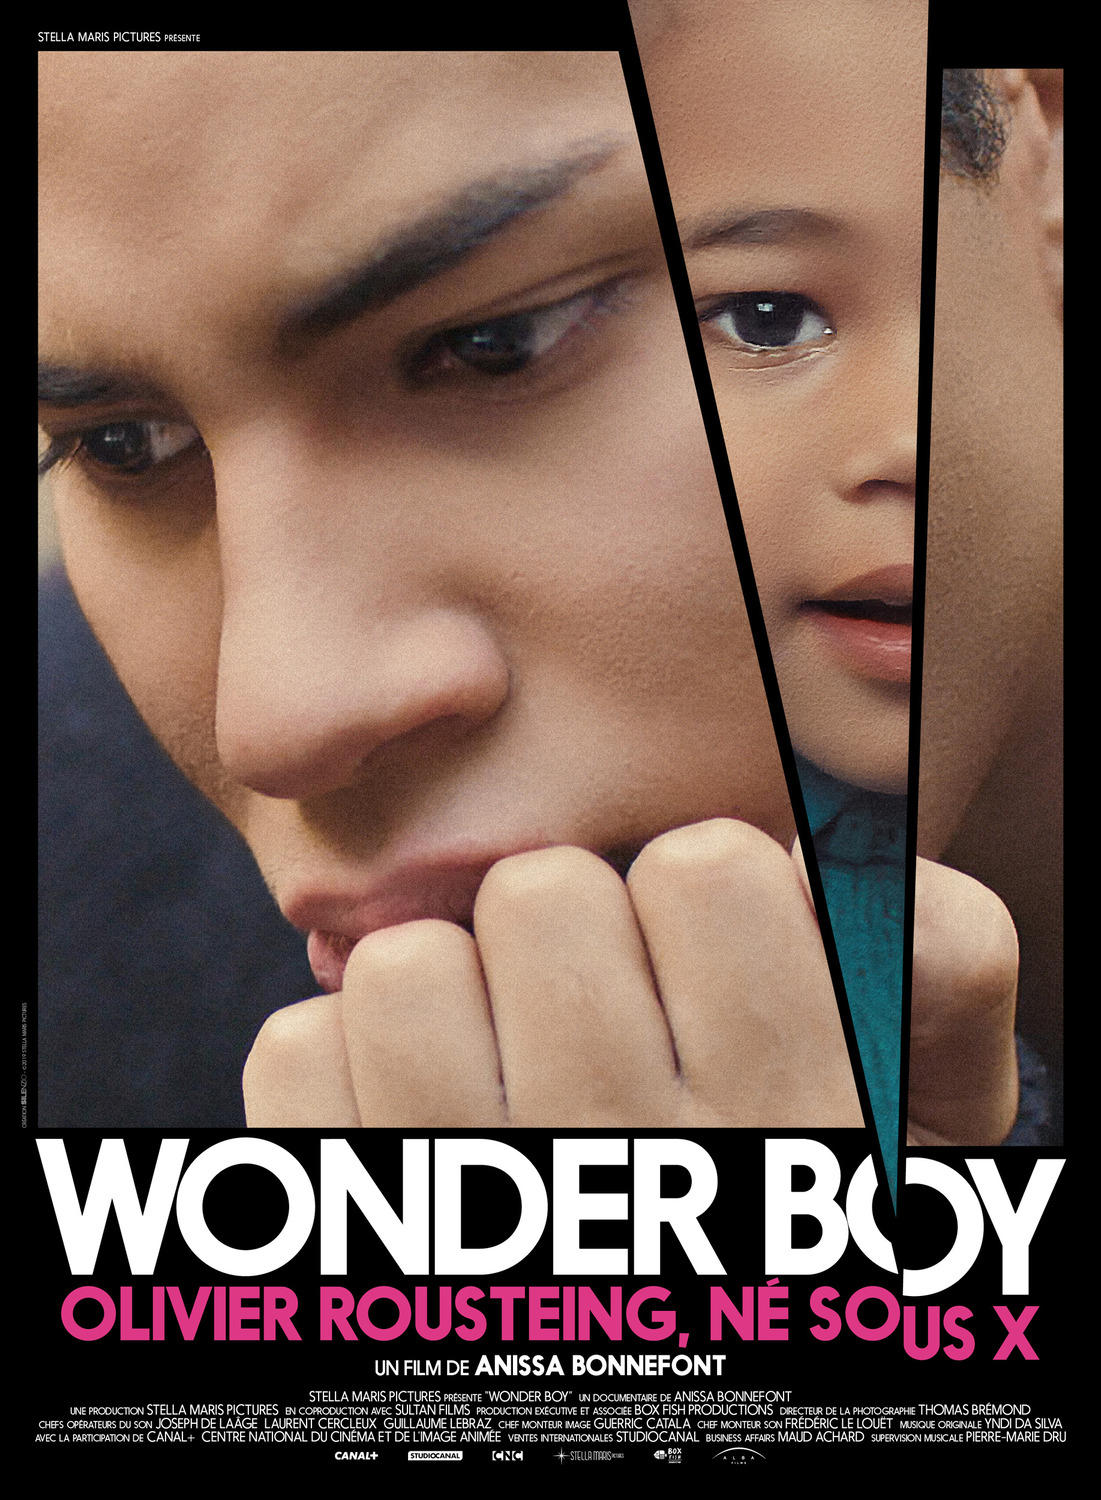 Extra Large Movie Poster Image for Wonder Boy, Olivier Rousteing, né sous X 